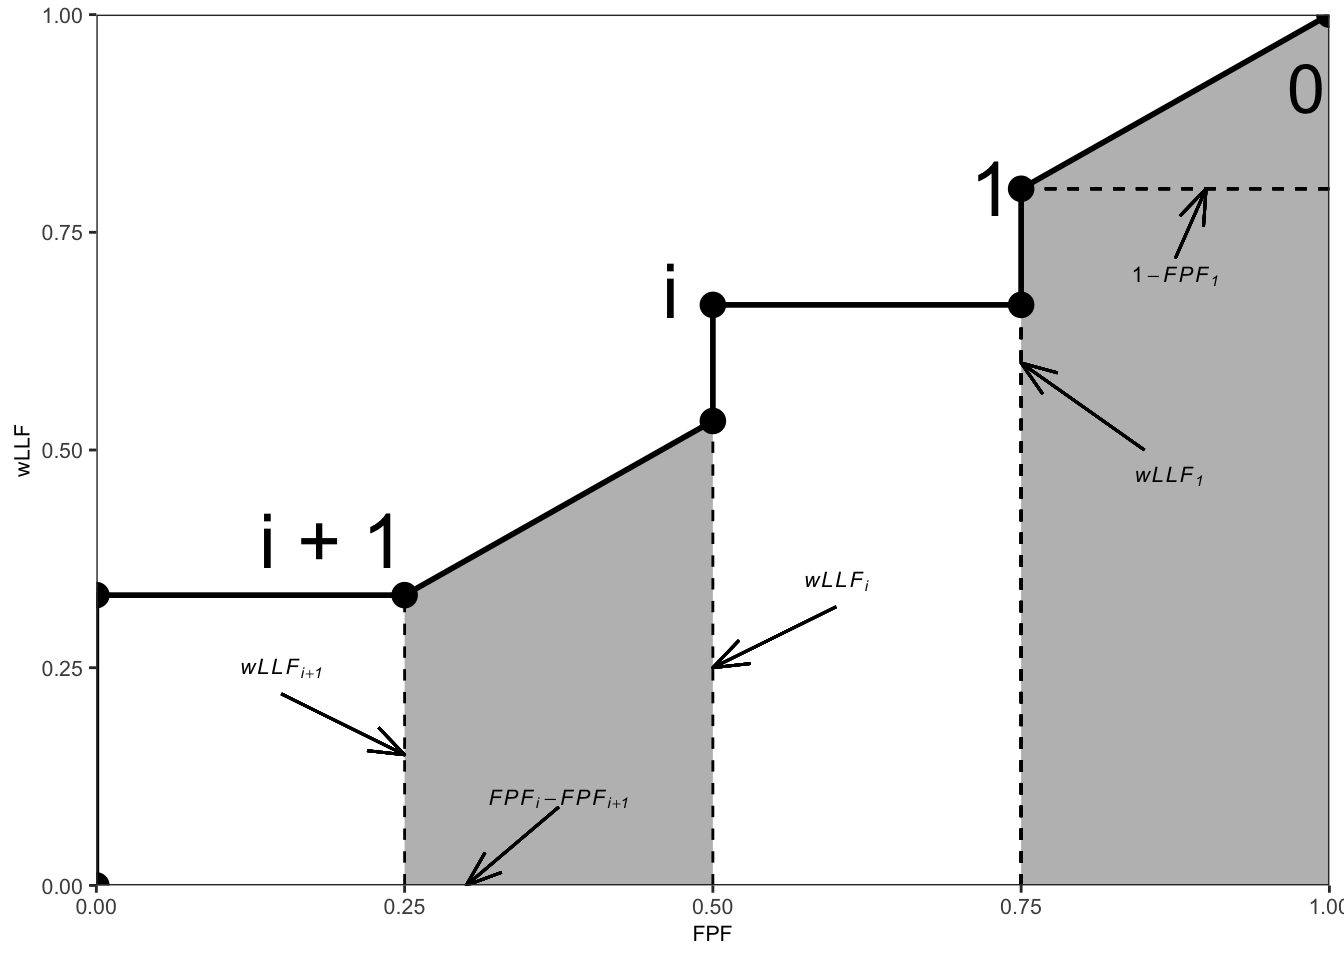 An example wAFROC plot; from left to right, the two shaded areas correspond to $A_i$ and  $A_0$, respectively, defined below.